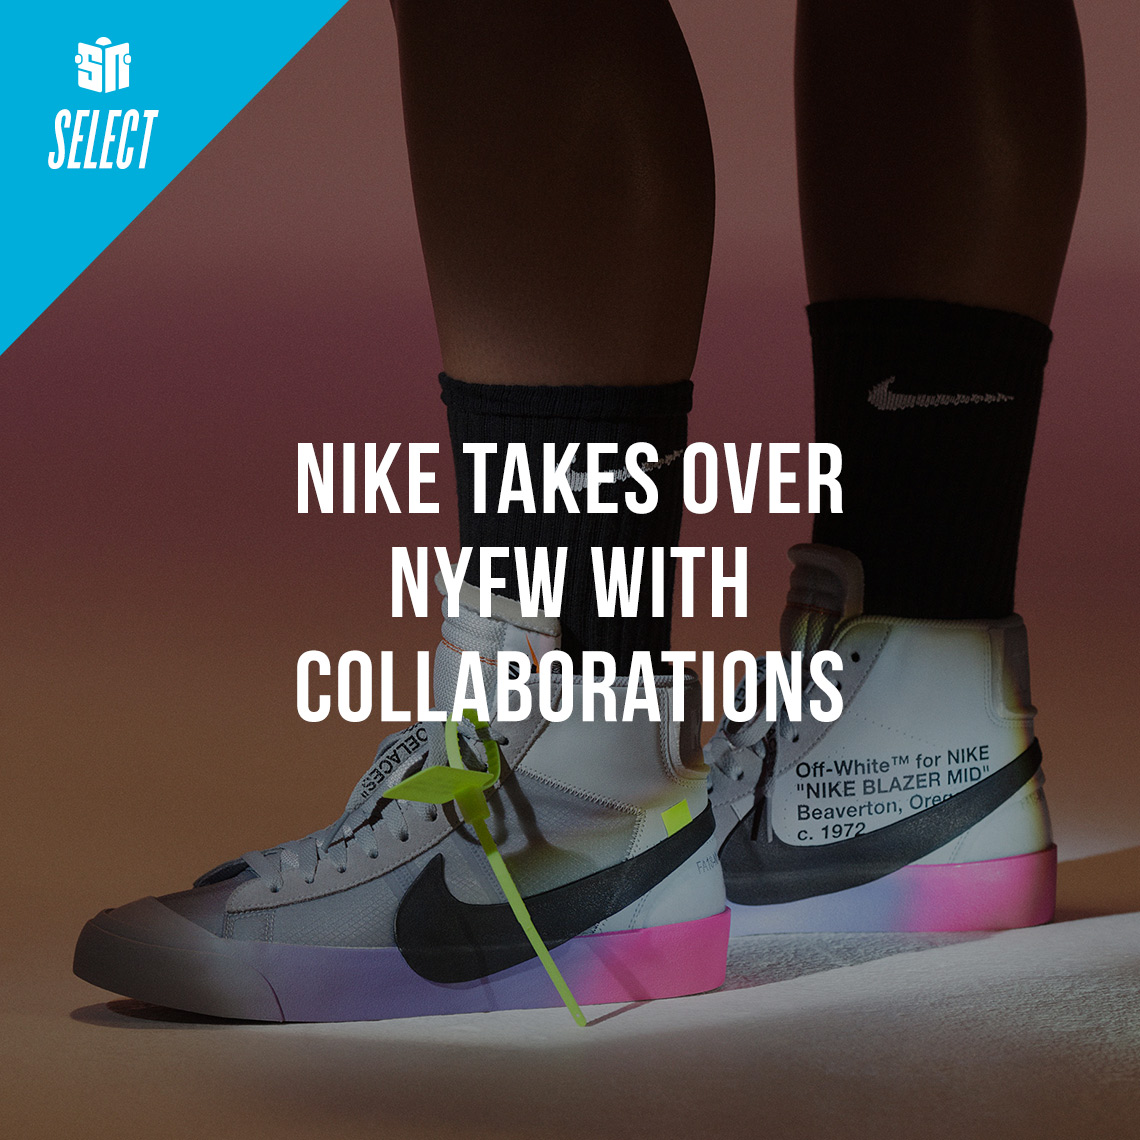 Off-White, PSNY, Skepta, And More Nike Collaborations For NYFW And US Open